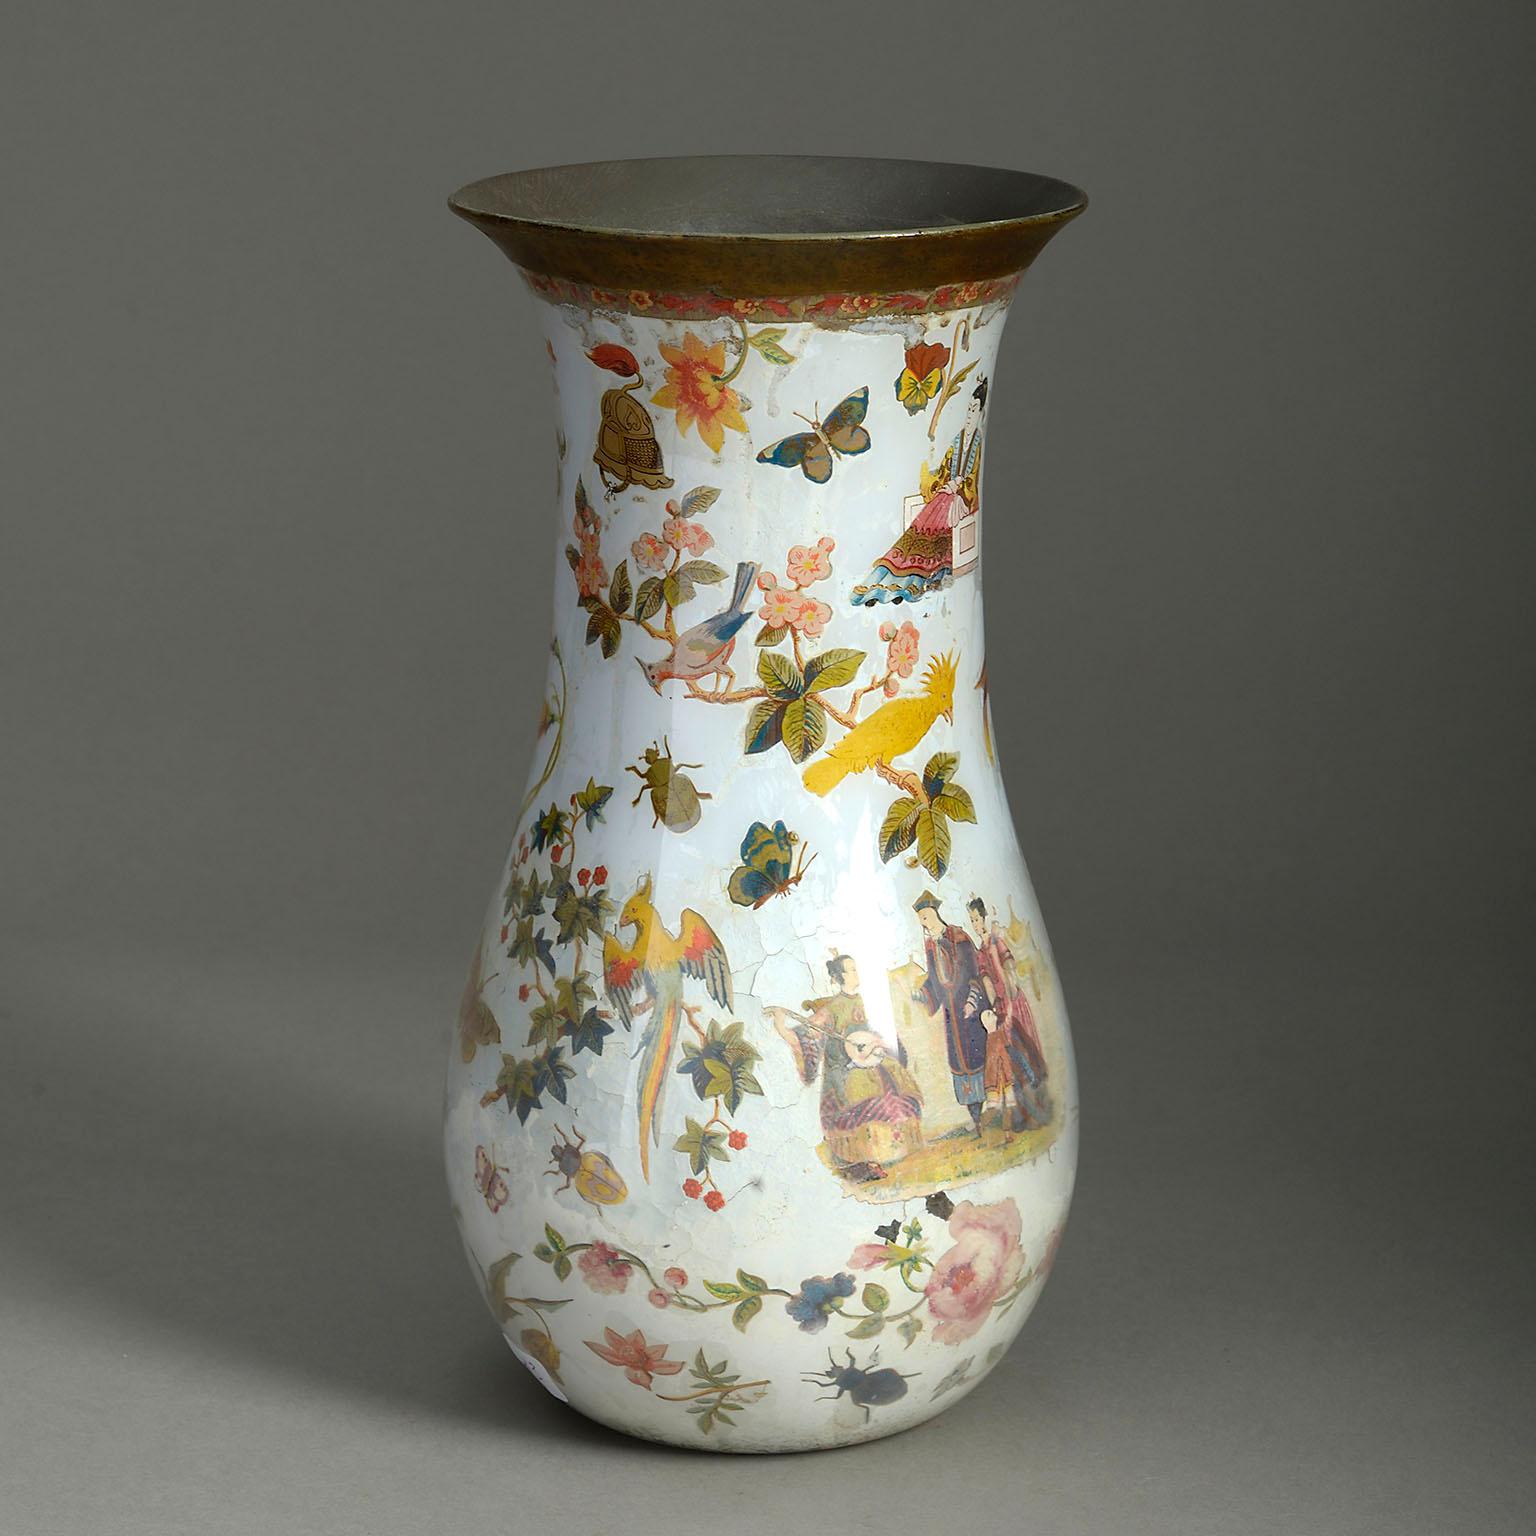 A 19th century Decalcomania vase, with trumpet neck, decorated throughout with hand-coloured chinoiseries upon a stone white ground.